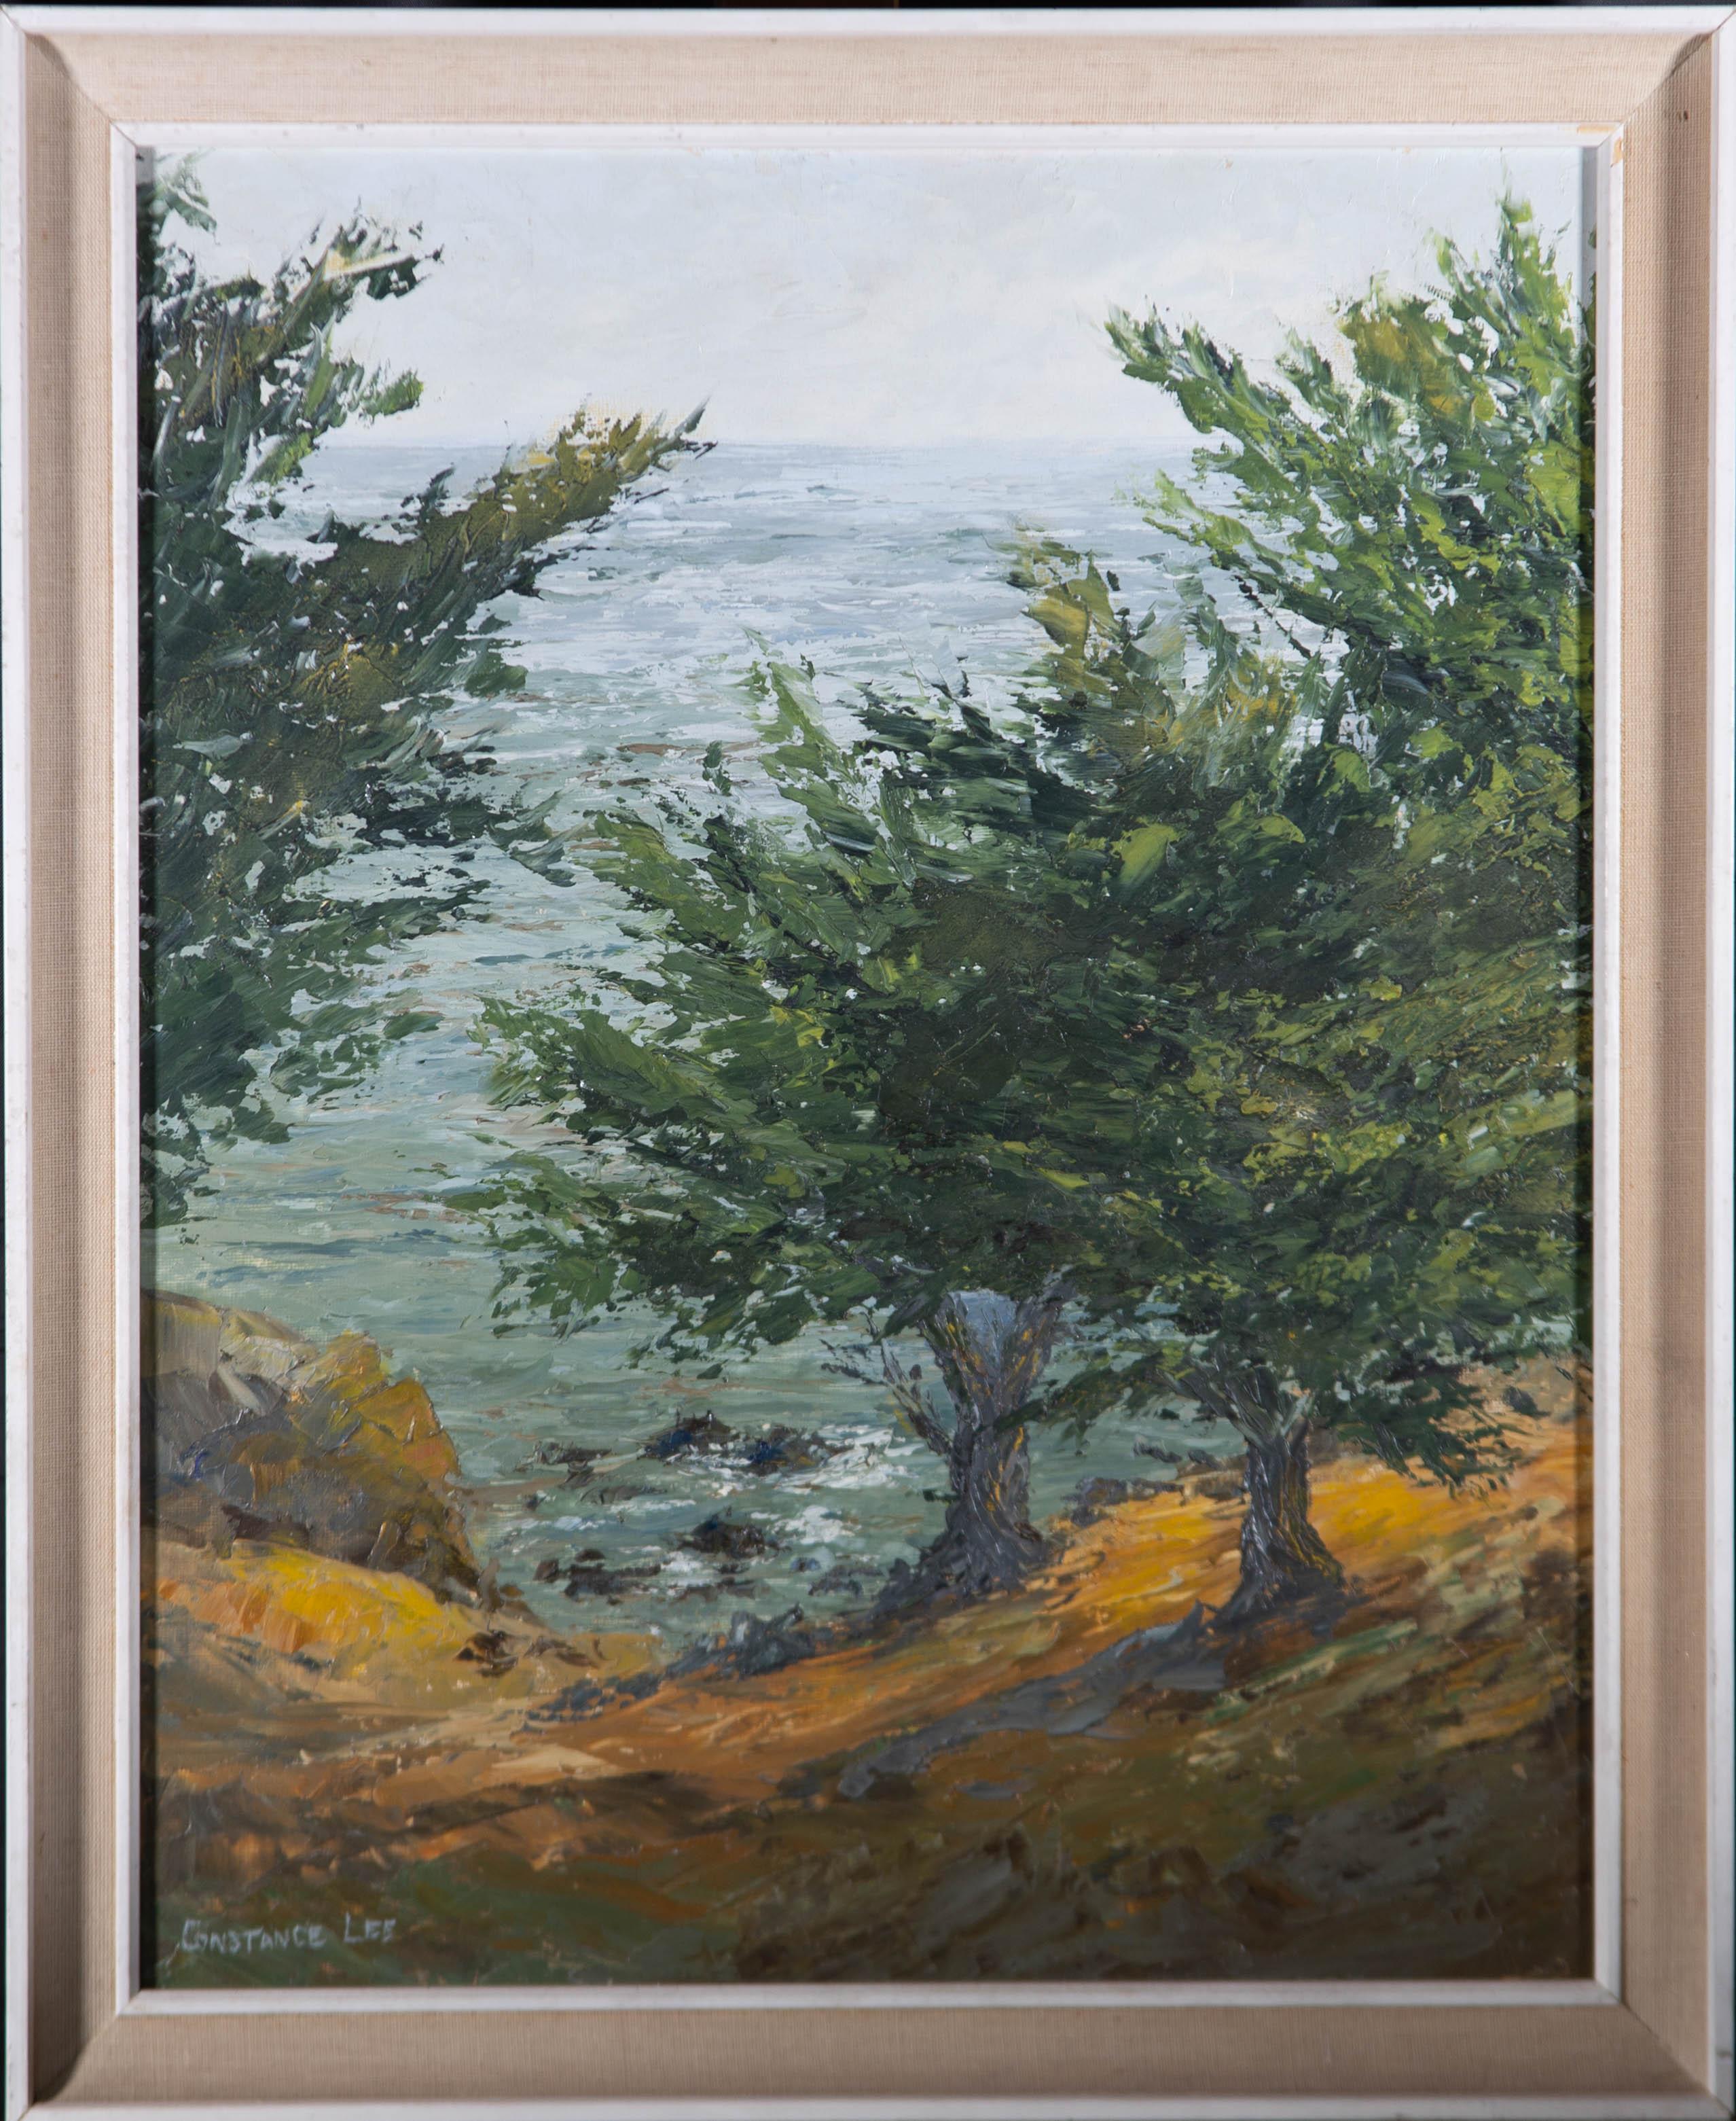 A fine impasto oil painting by Constance Lee, depicting a coastal scene with trees. Signed to the lower left-hand corner. The artist's name and title are inscribed on the reverse. Presented in a white wooden frame with a fabric detail. On canvas